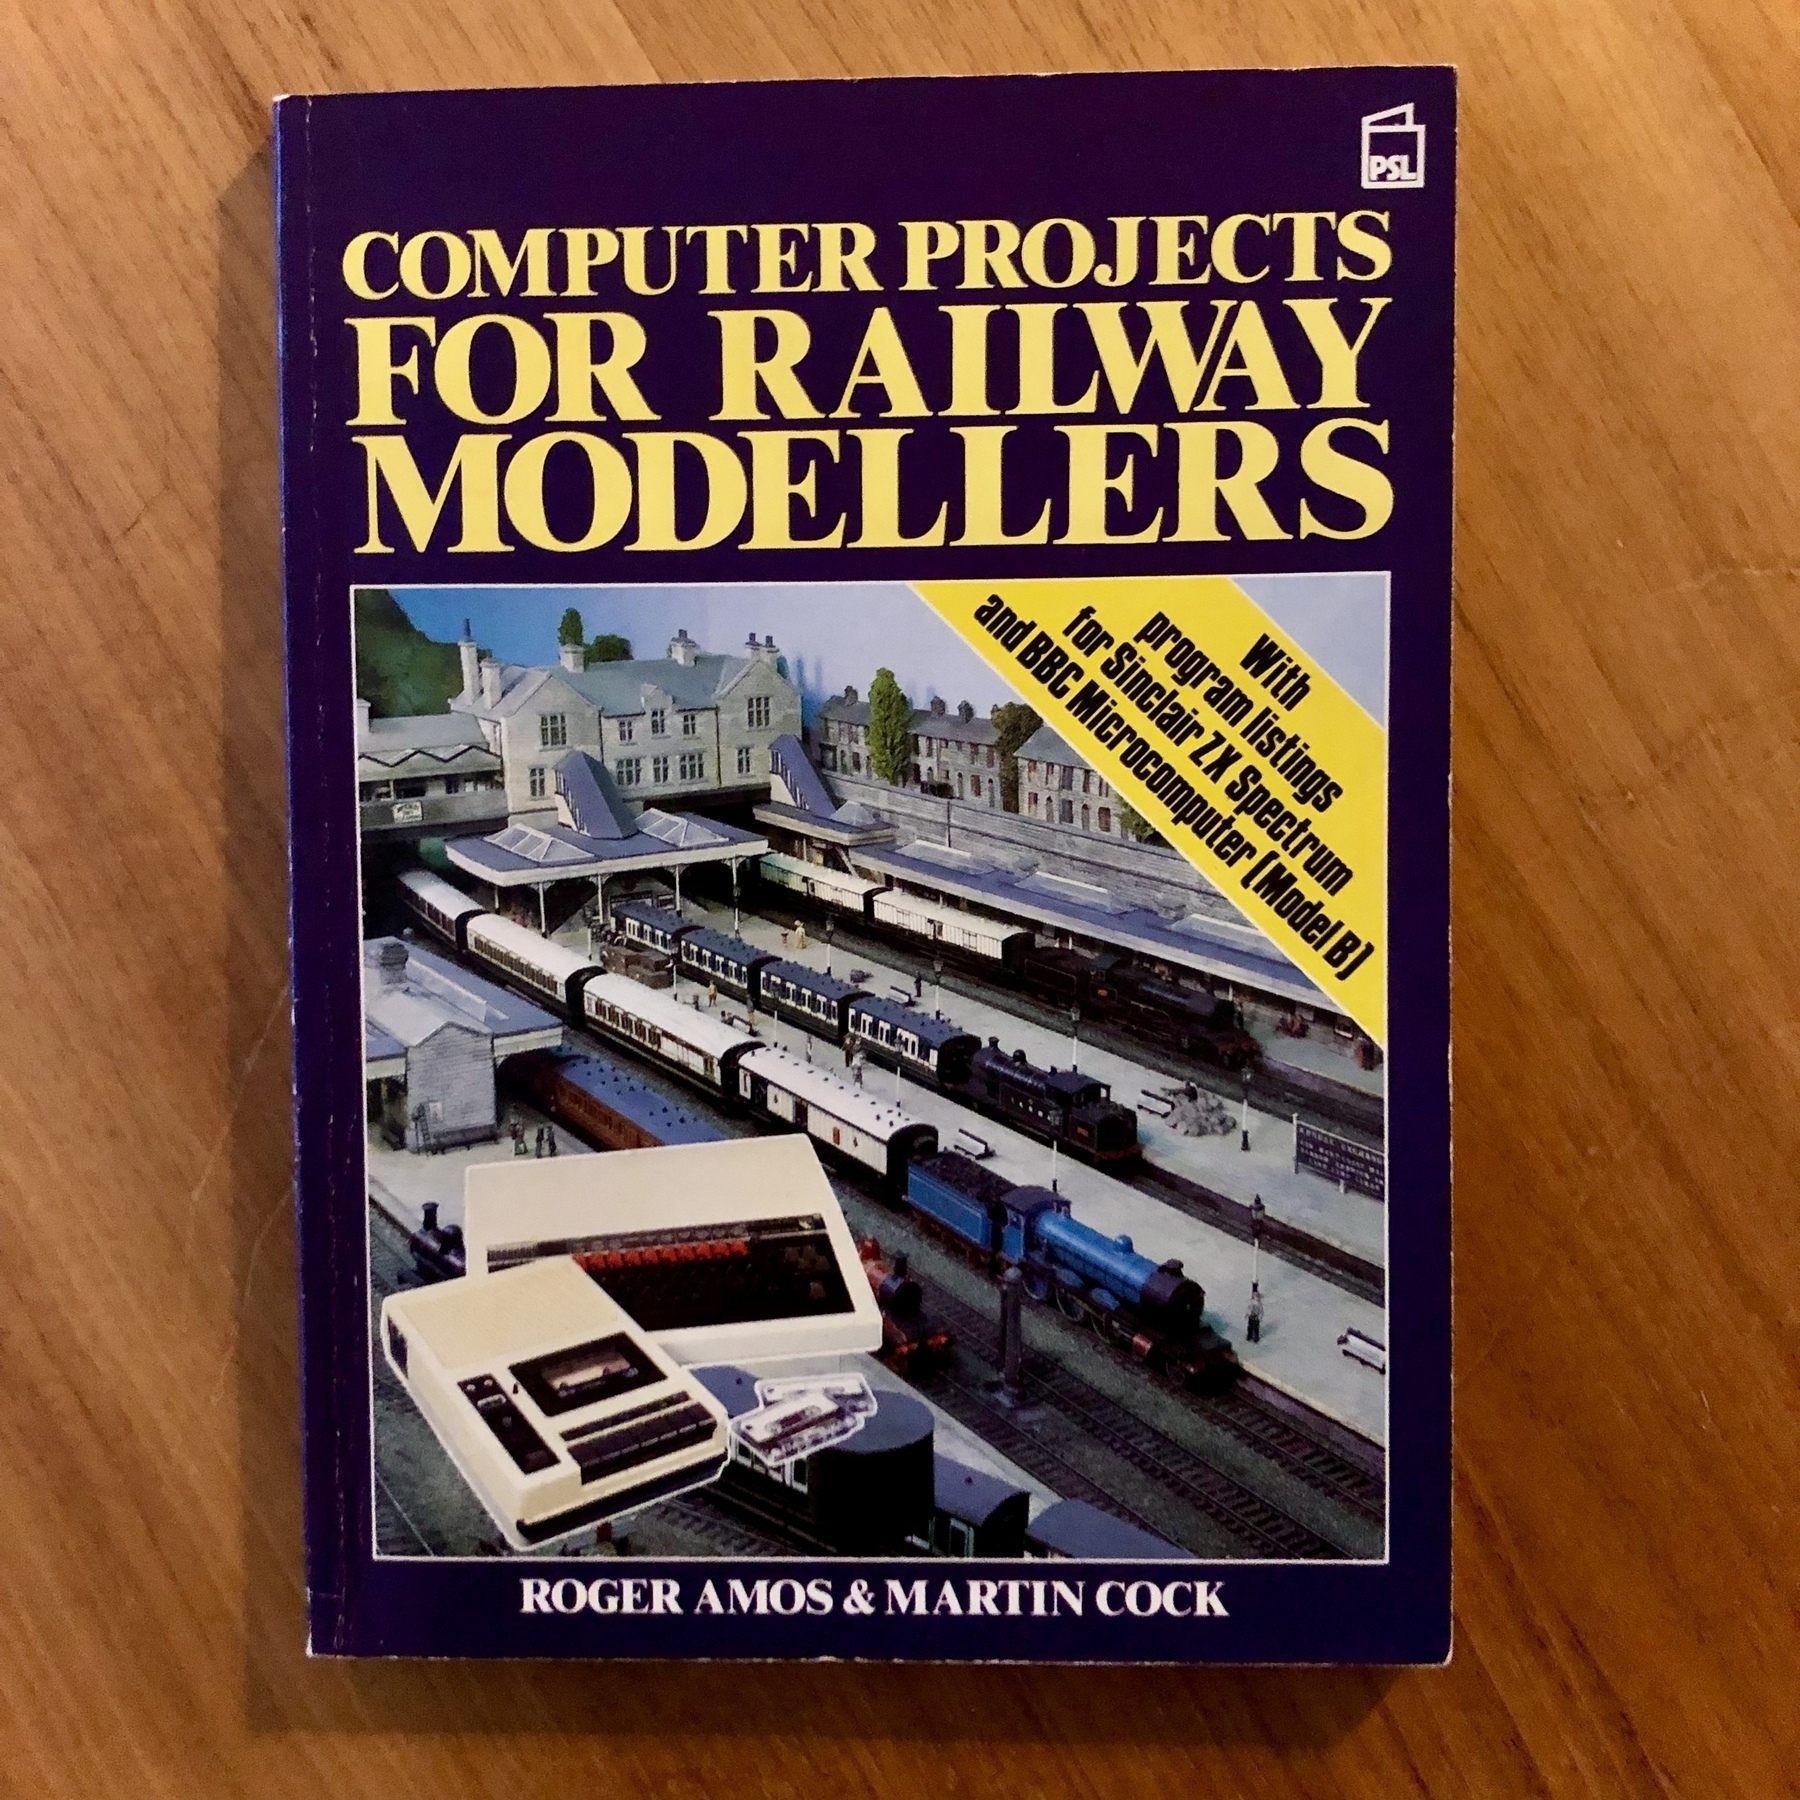 Paperback book. Cover illustration shows a model railway close up, with a BBC Micro superimposed